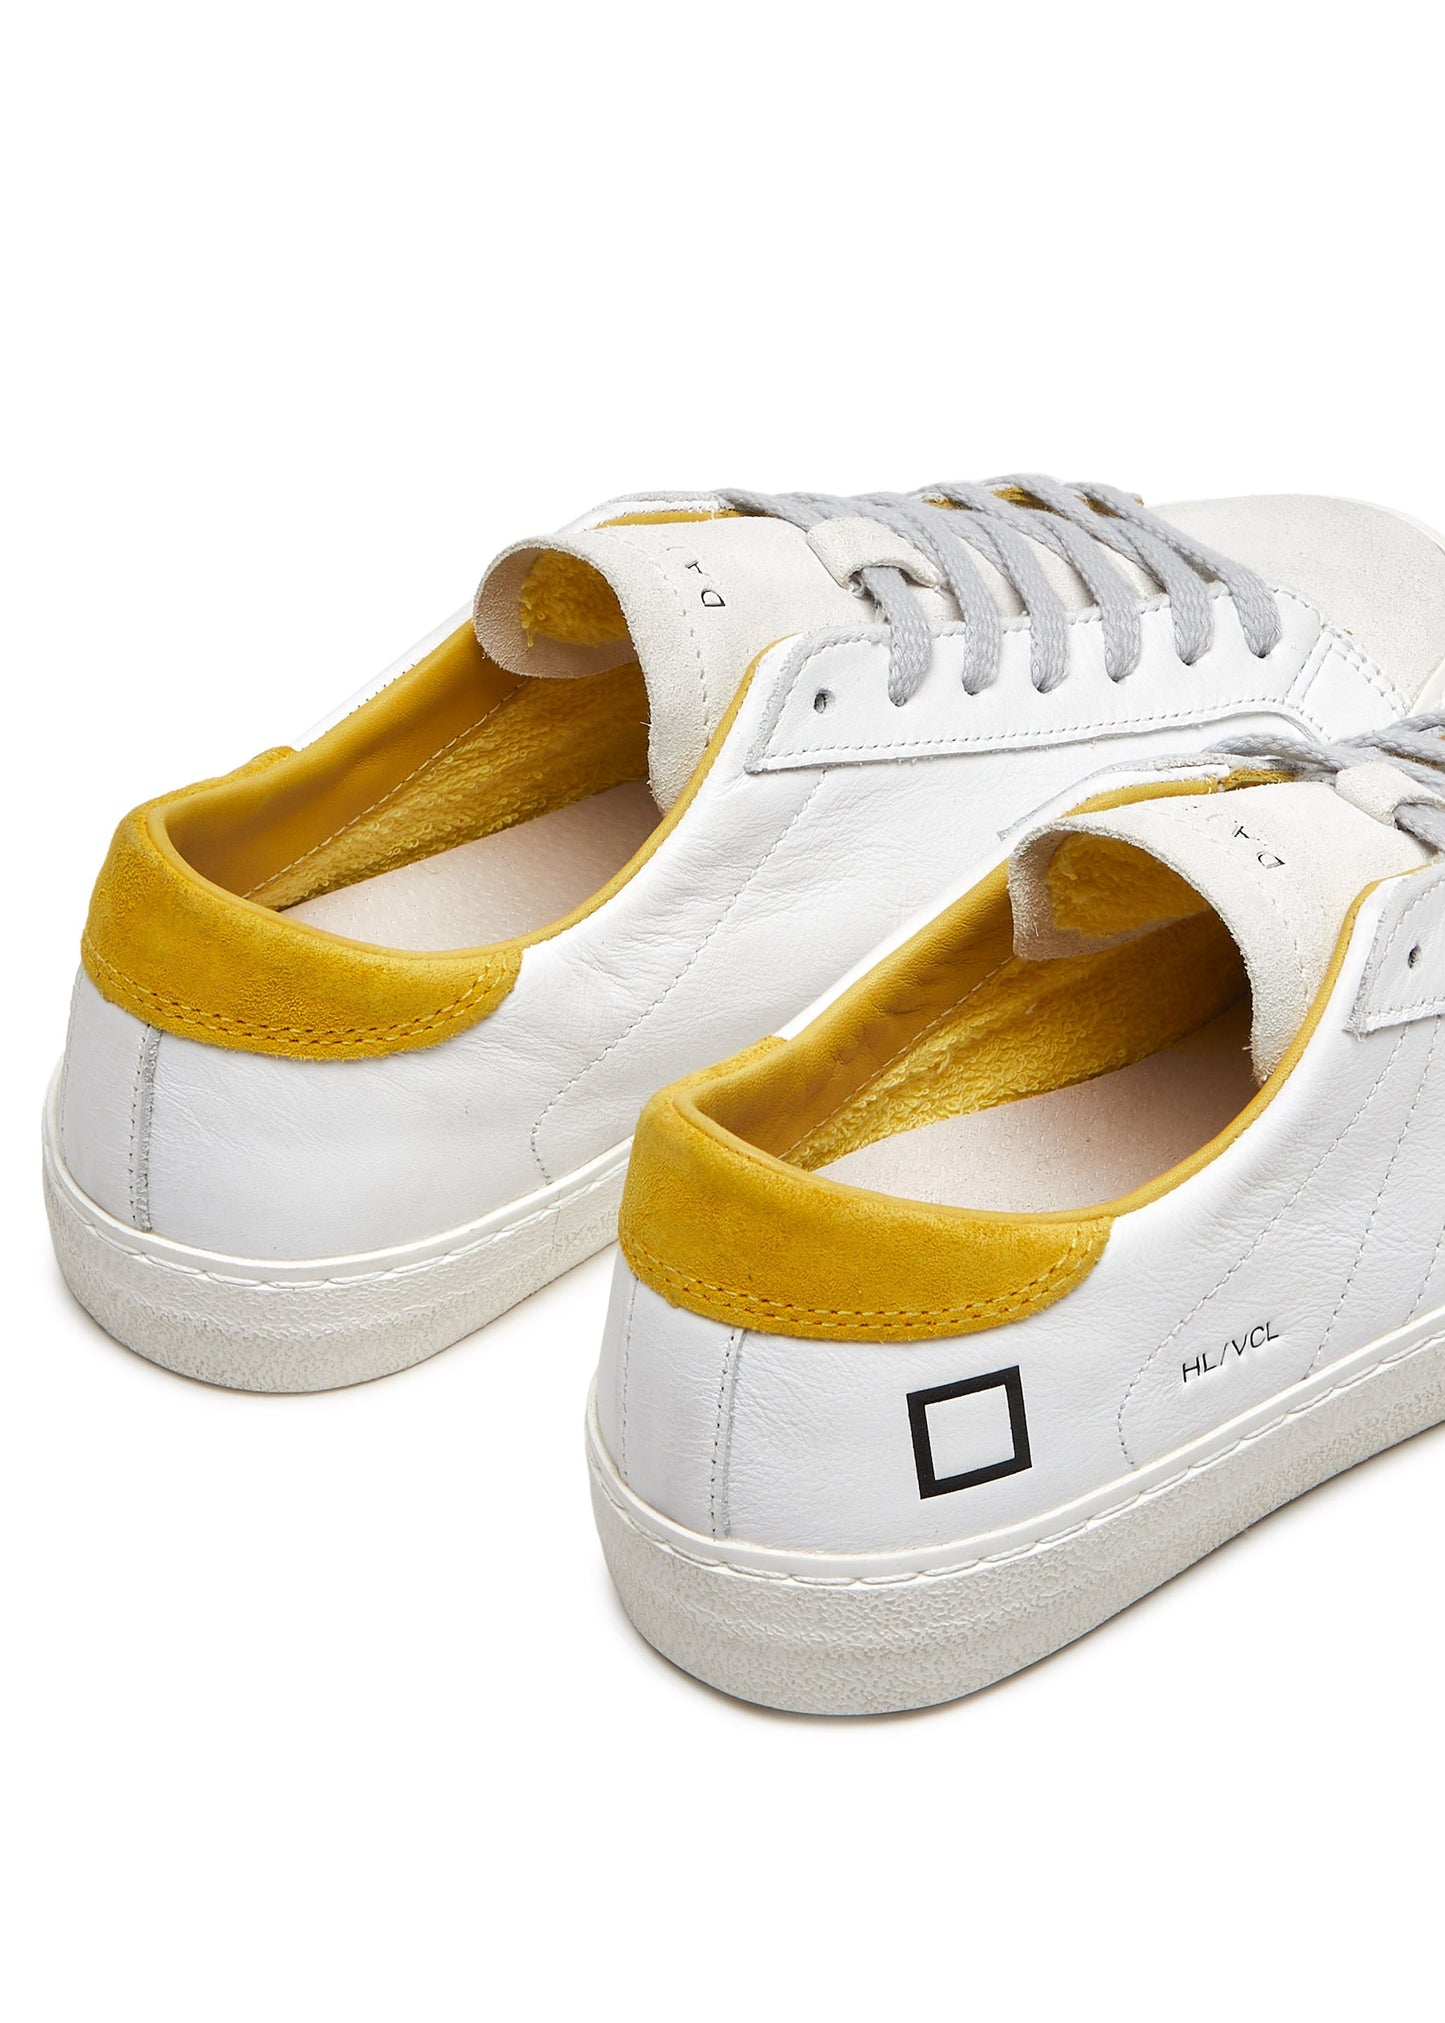 DATE Hill Low Trainers White/Yellow